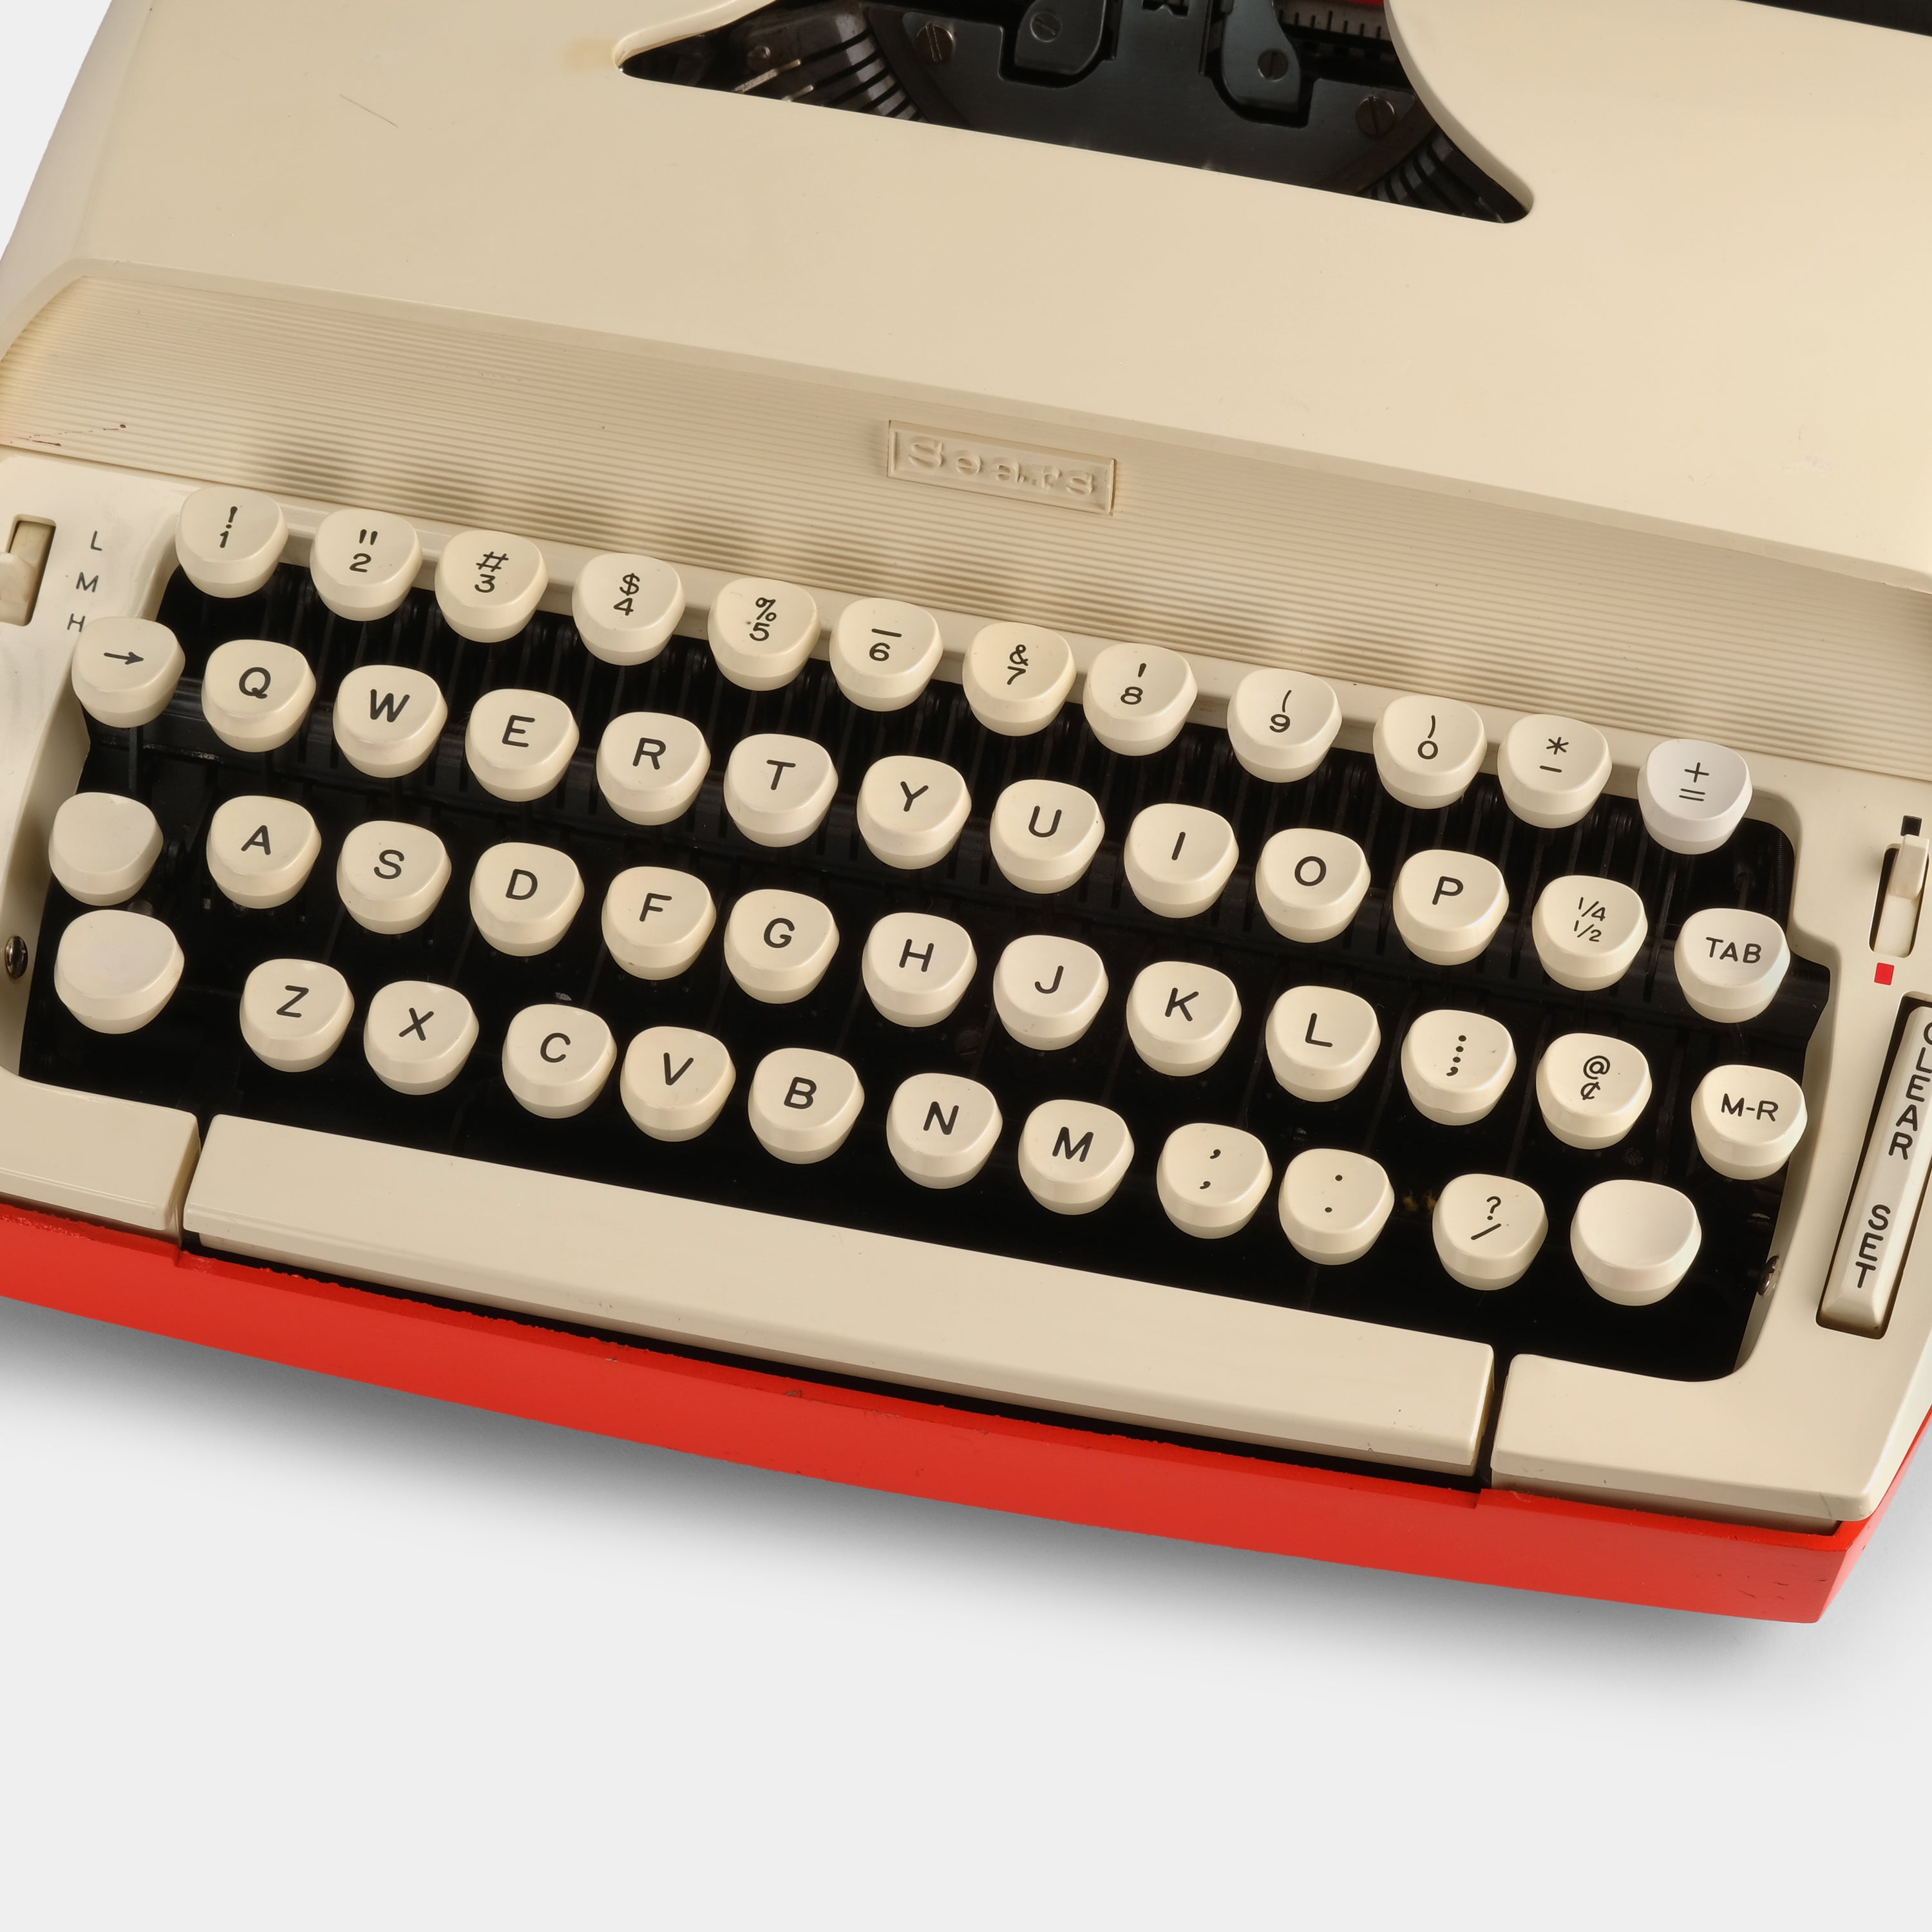 Sears Constellation II Beige and Red Manual Typewriter and Case